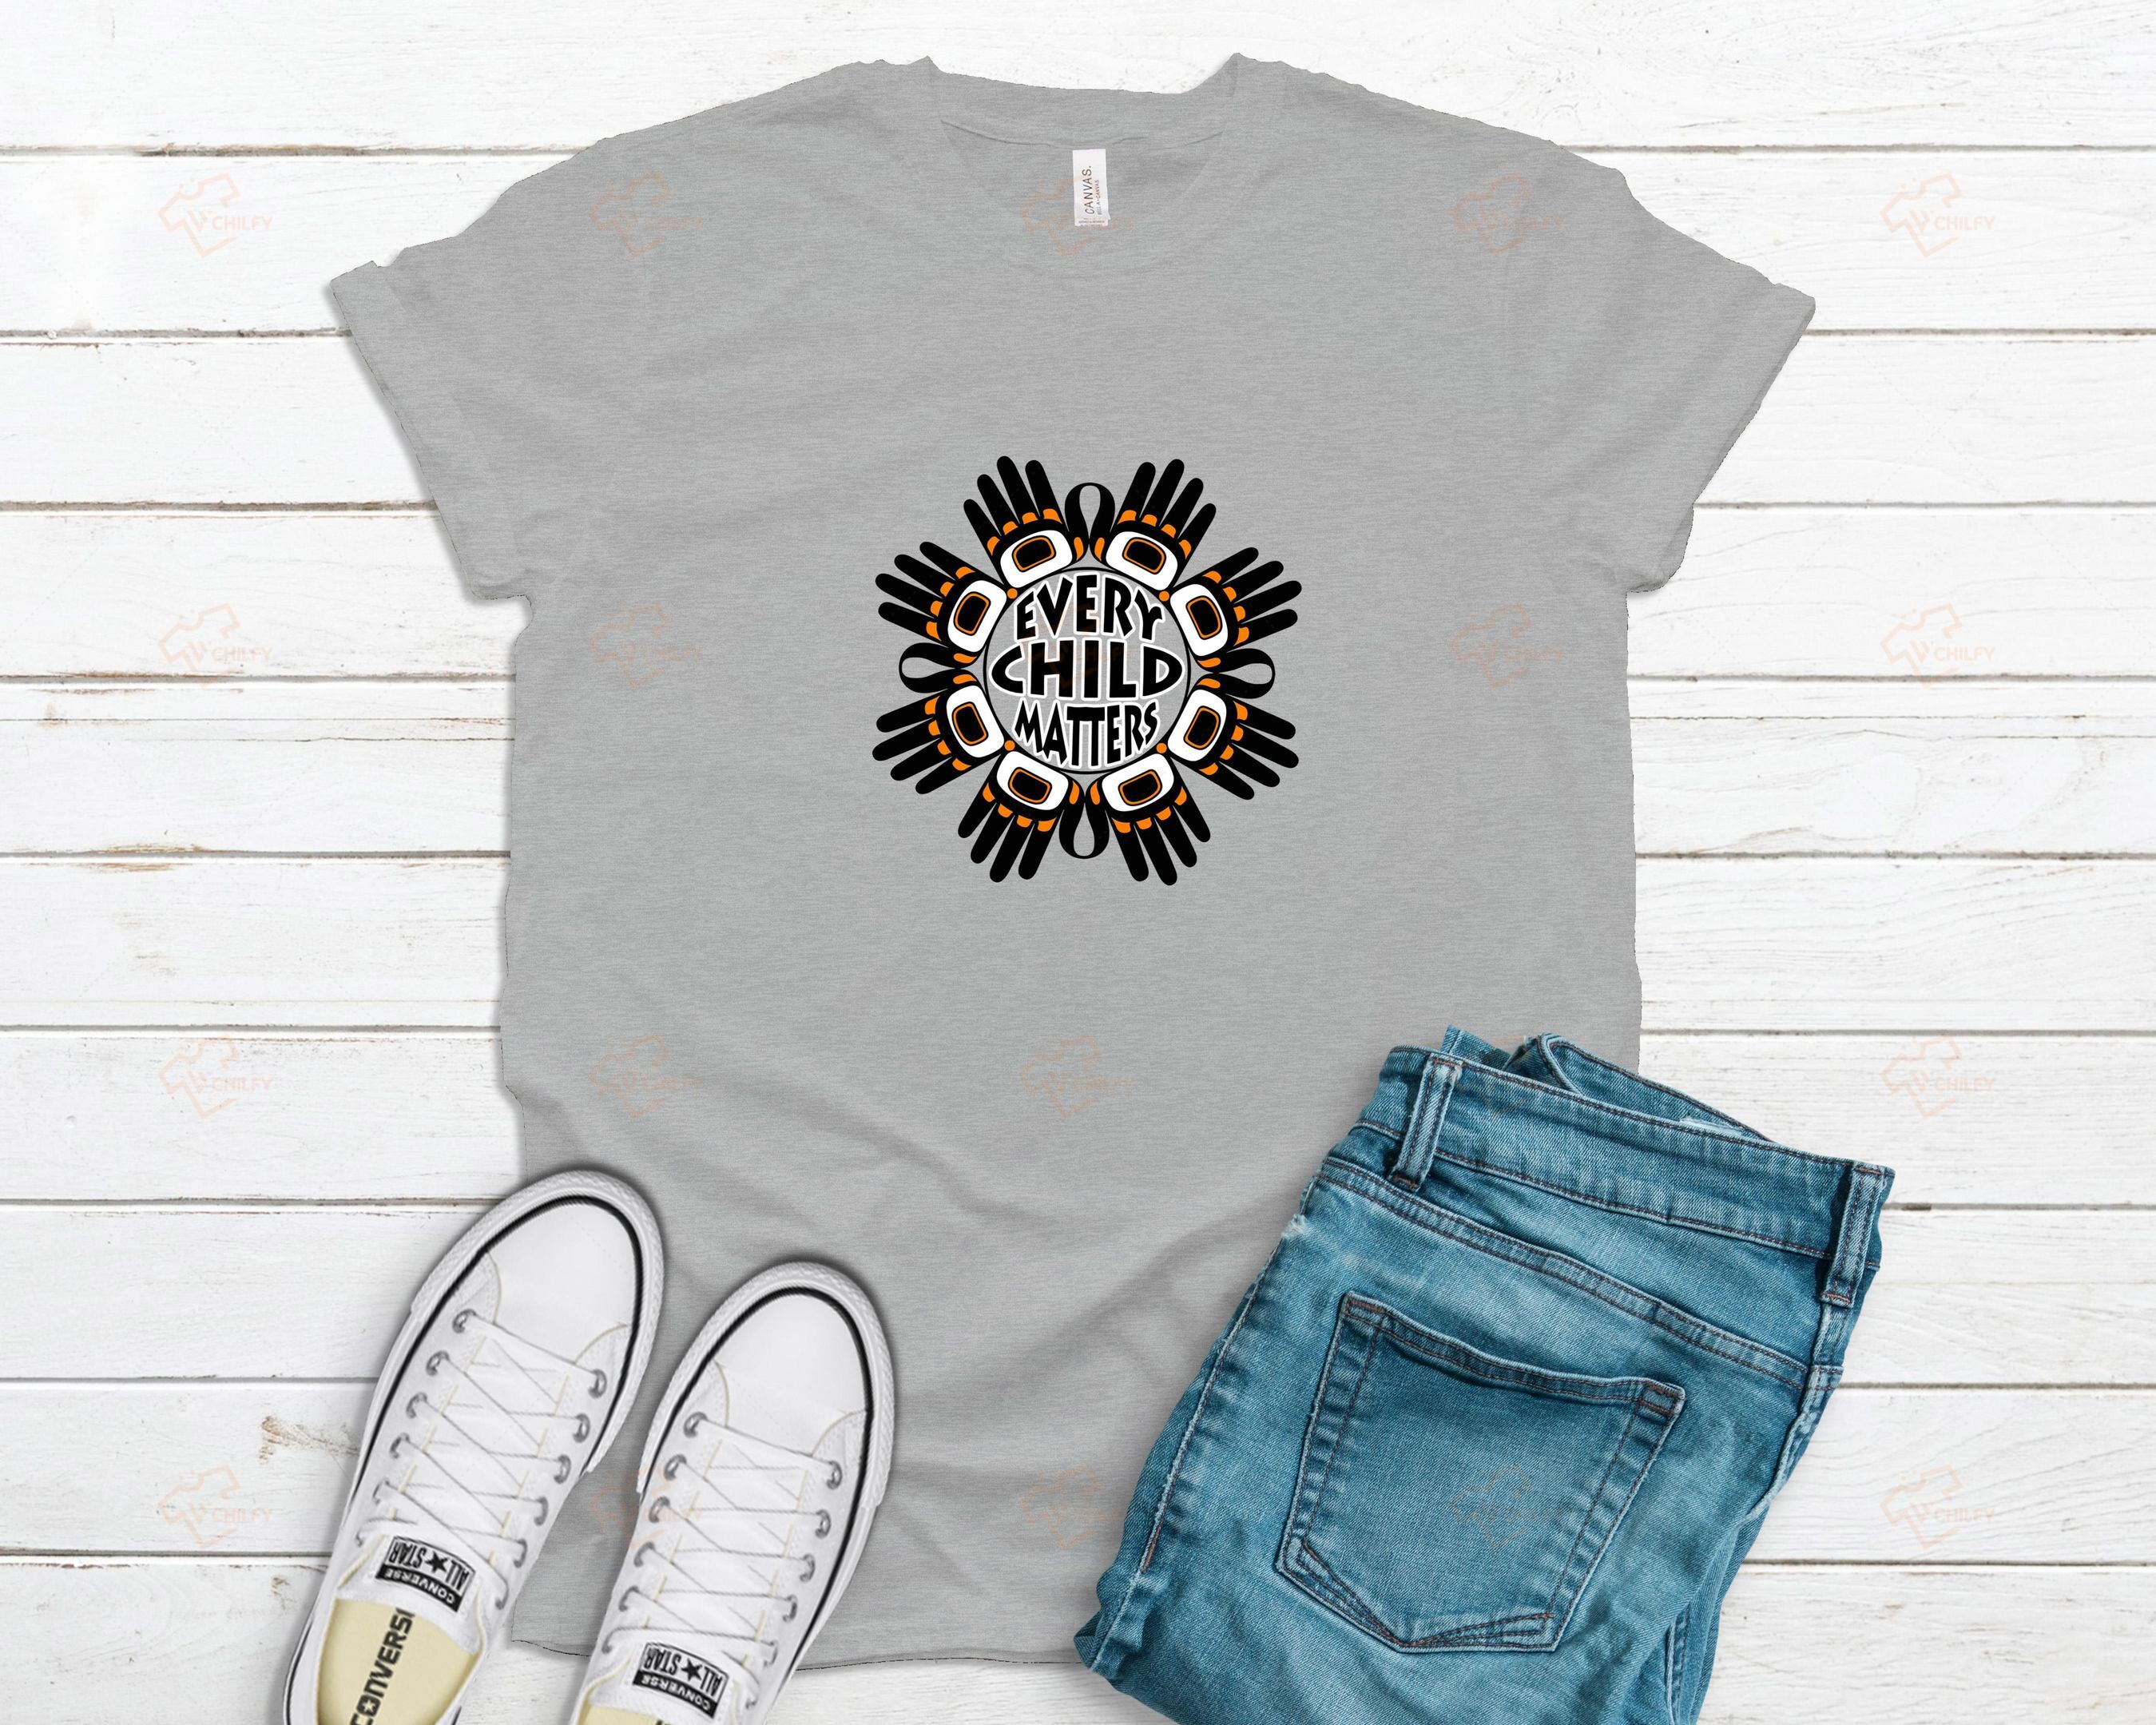 Every child matters shirt, Missing Murdered Children shirt, Native child matters shirt, Native American shirt, Native pride shirt, Native children shirt